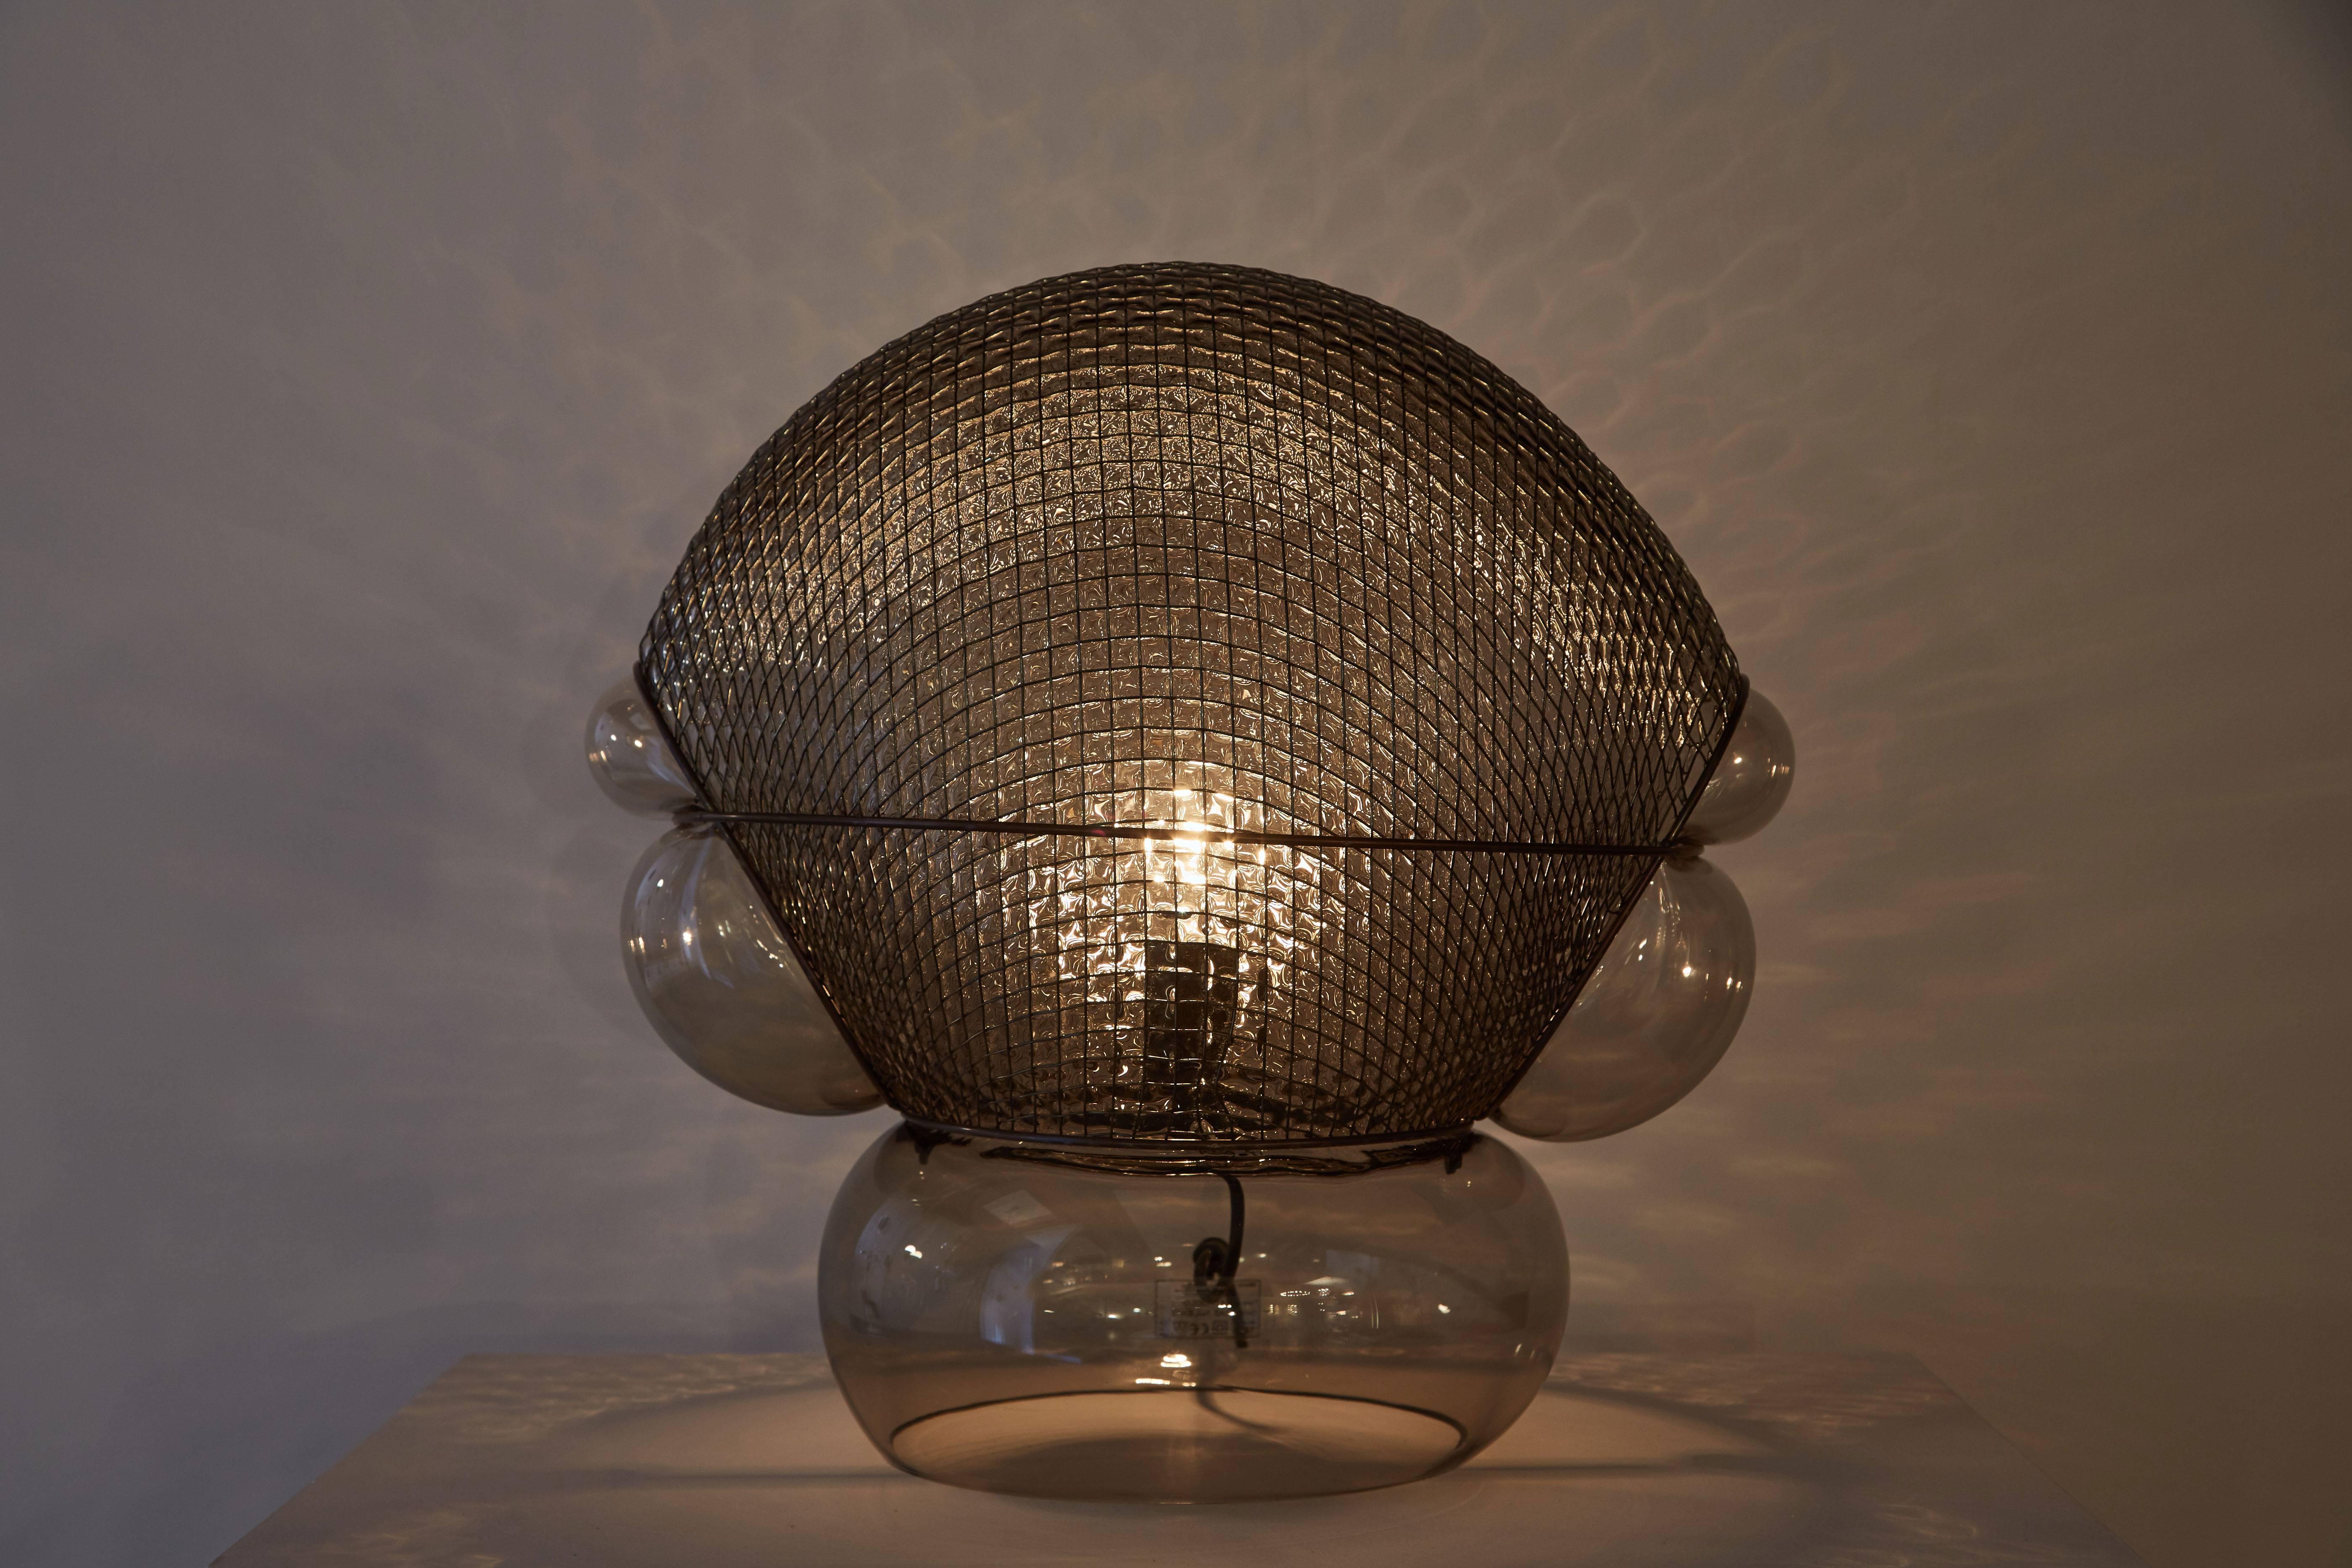 “Patroclo” table lamp by Gae Aulenti originally designed in 1975. Currently produced in Italy by Artemide. Comes with dimmer on the hand switch. Body made of smoke colored blown glass and steel mesh. Maintains original Artemide label. Takes one E27